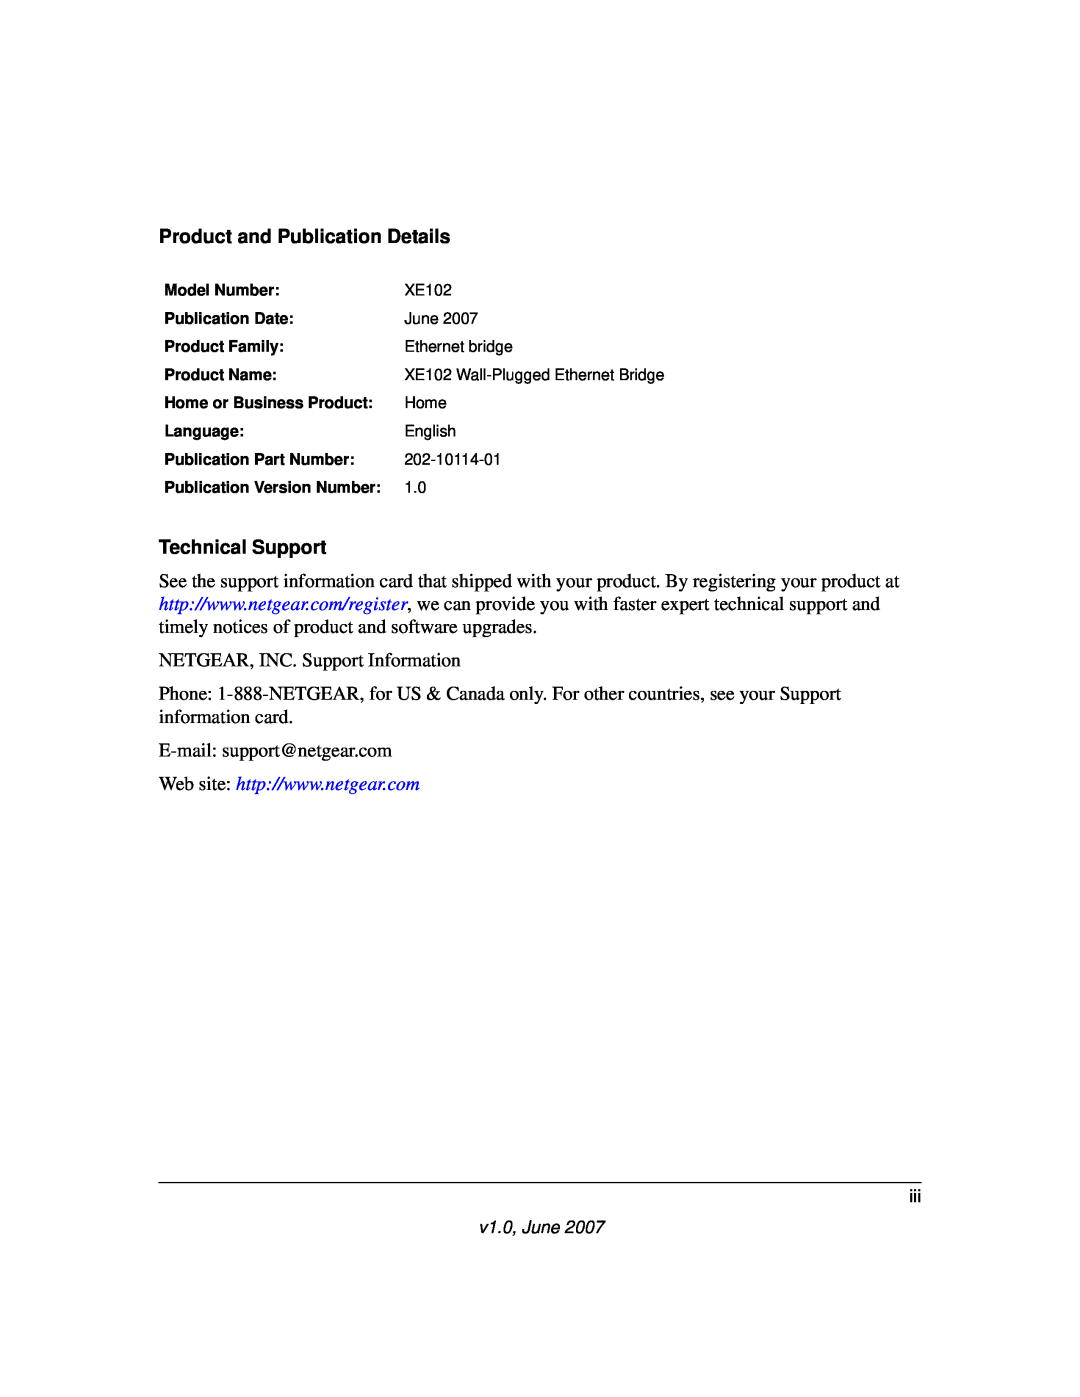 NETGEAR XE102 manual Product and Publication Details, Technical Support, NETGEAR, INC. Support Information, v1.0, June 